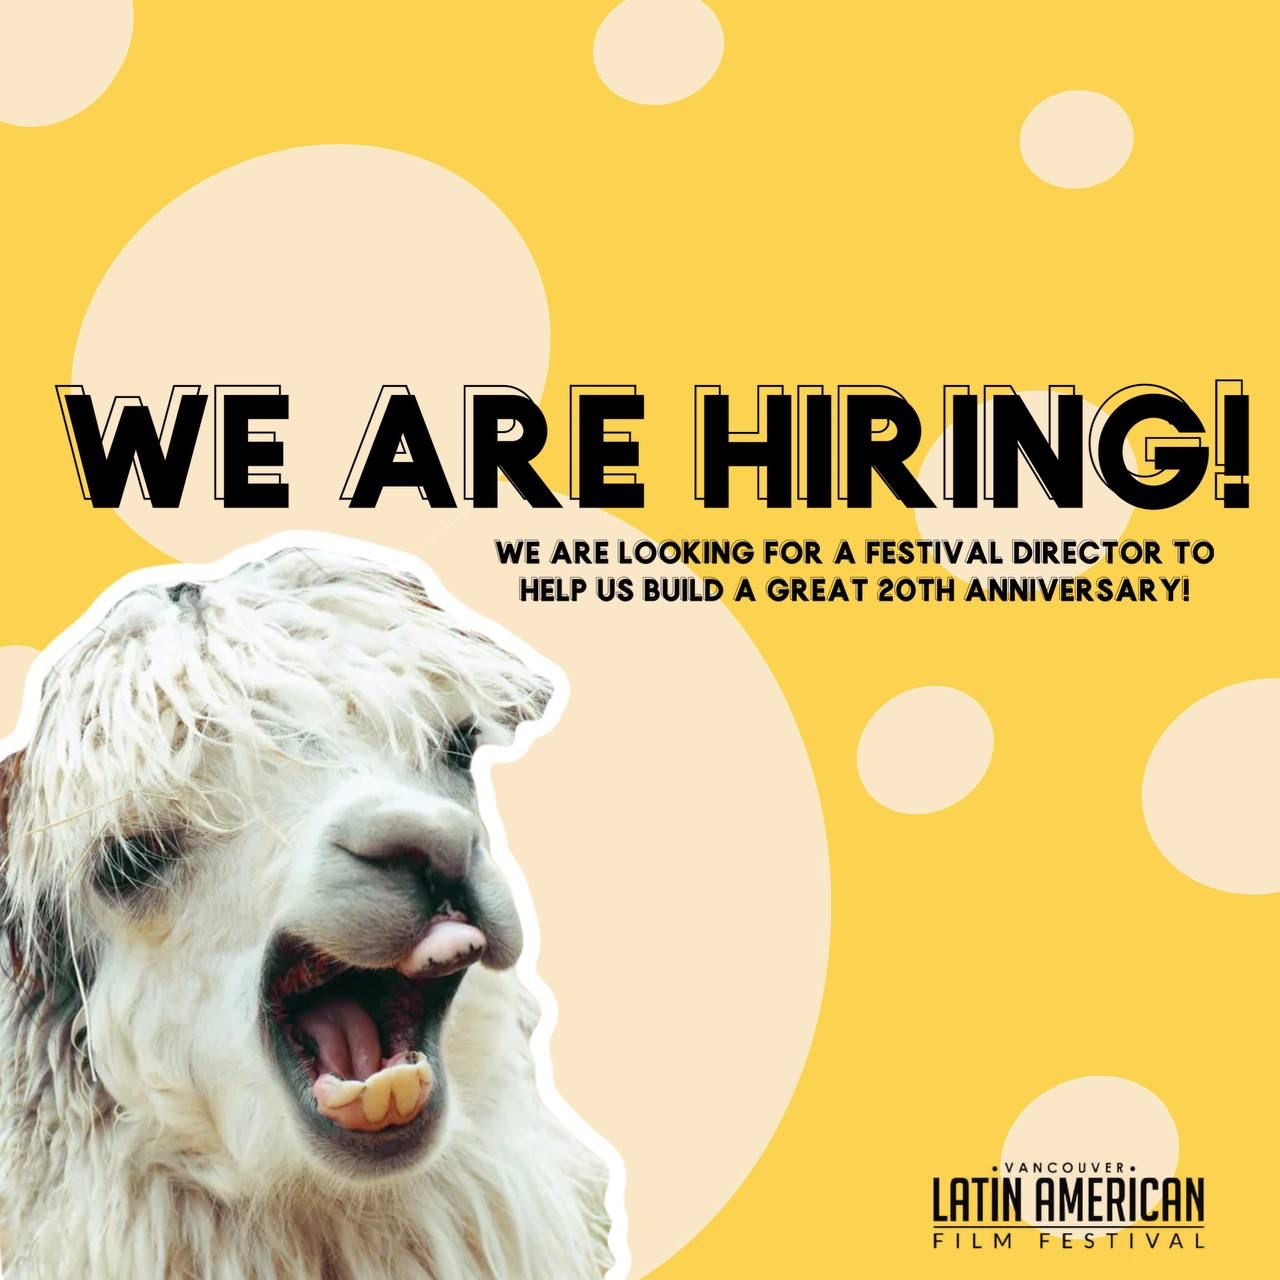 WE ARE HIRING -20th Anniversary Festival Director